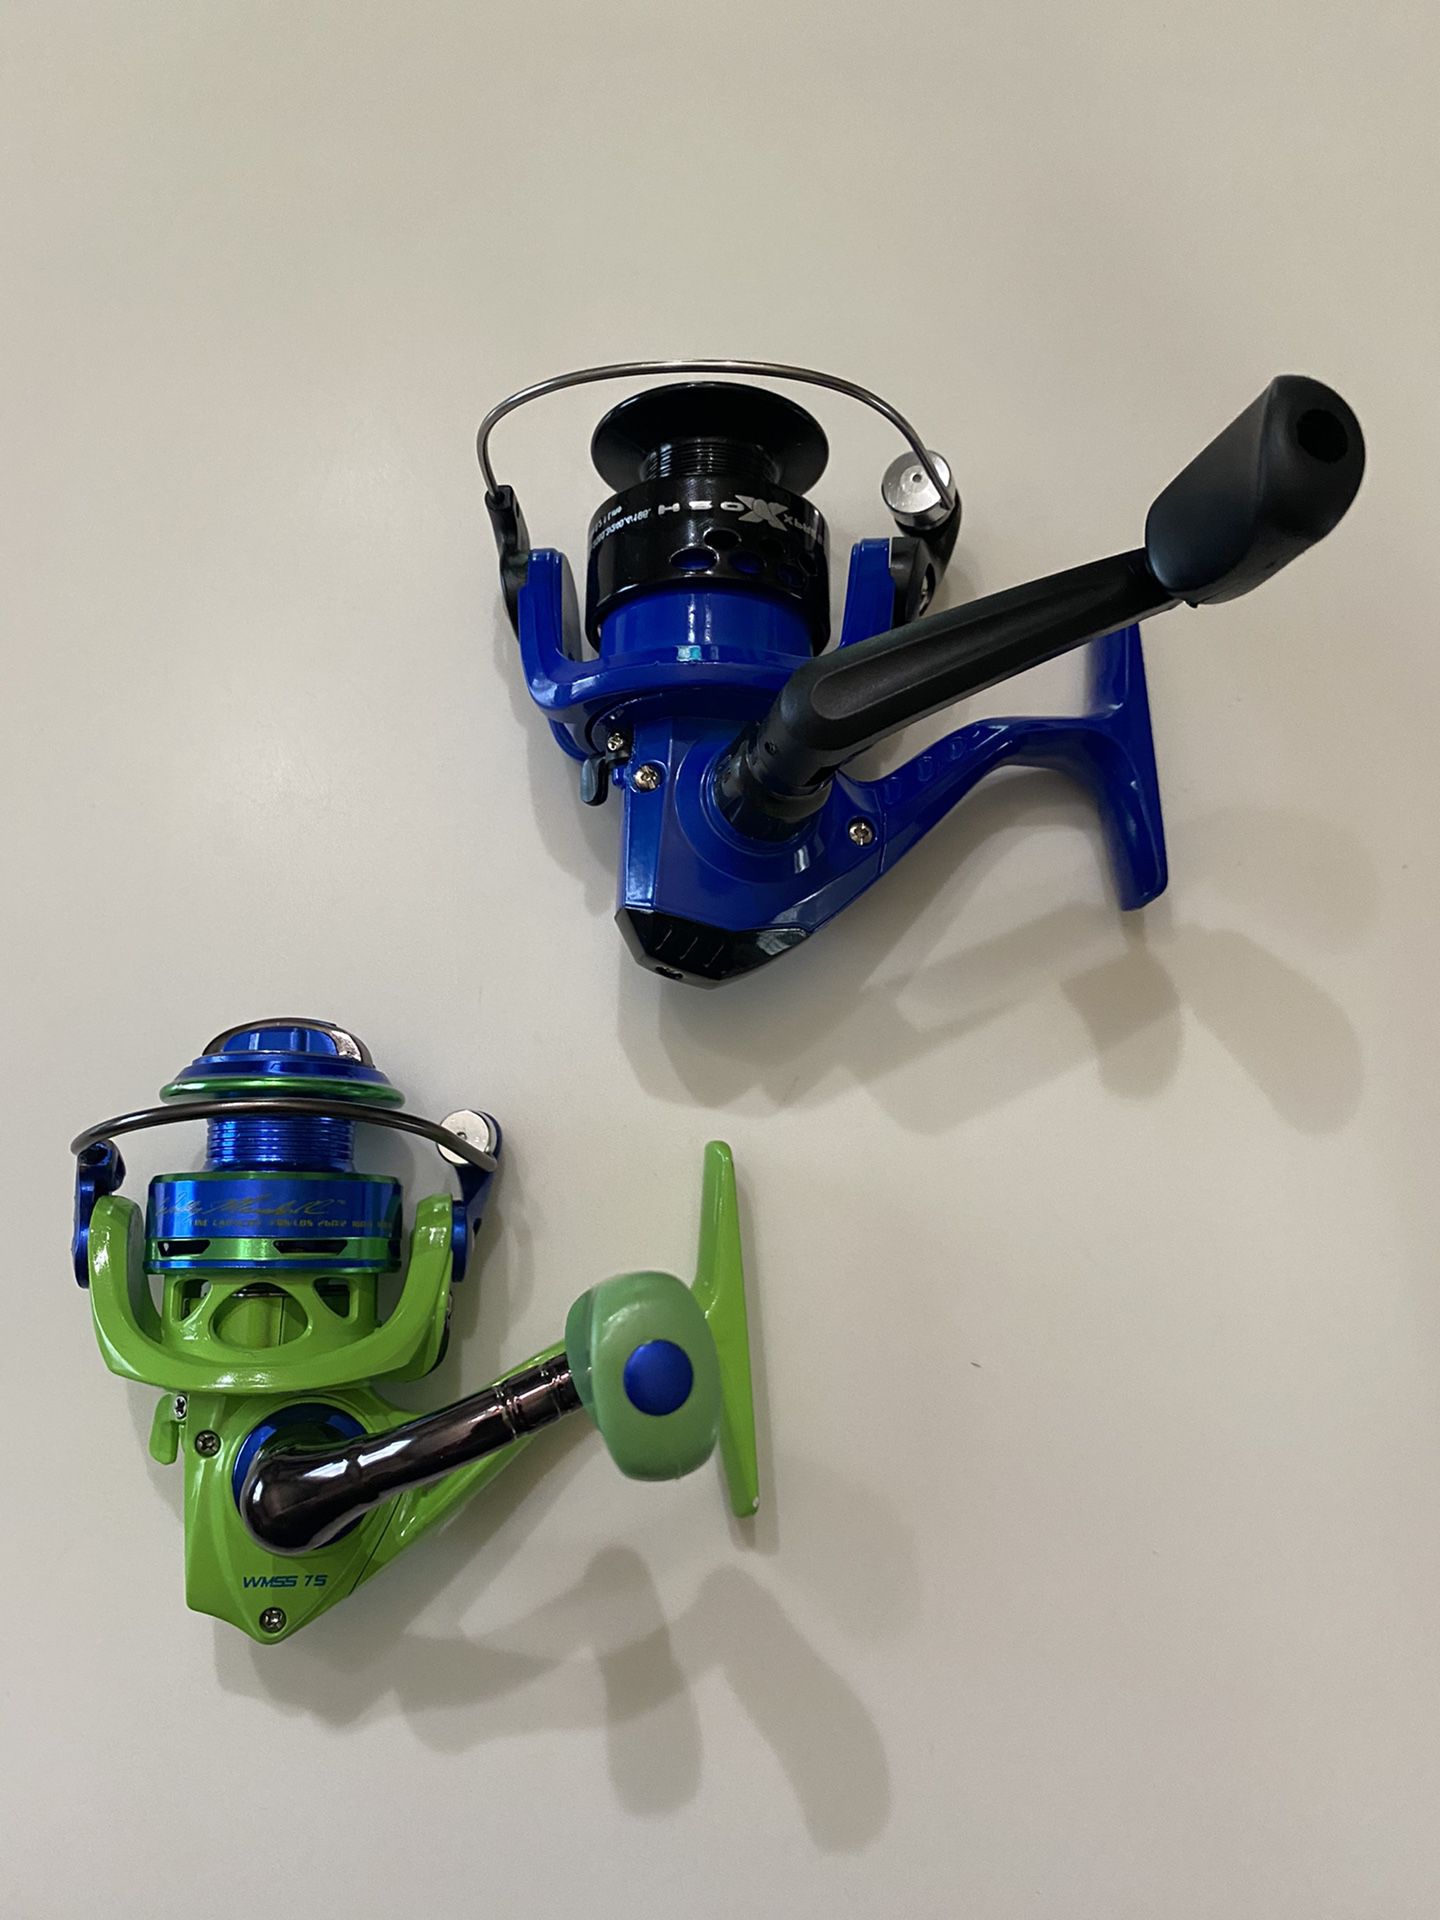 Lot of 2 spinning fishing reels, Lew’s Wally Marshall & H2O Xpress